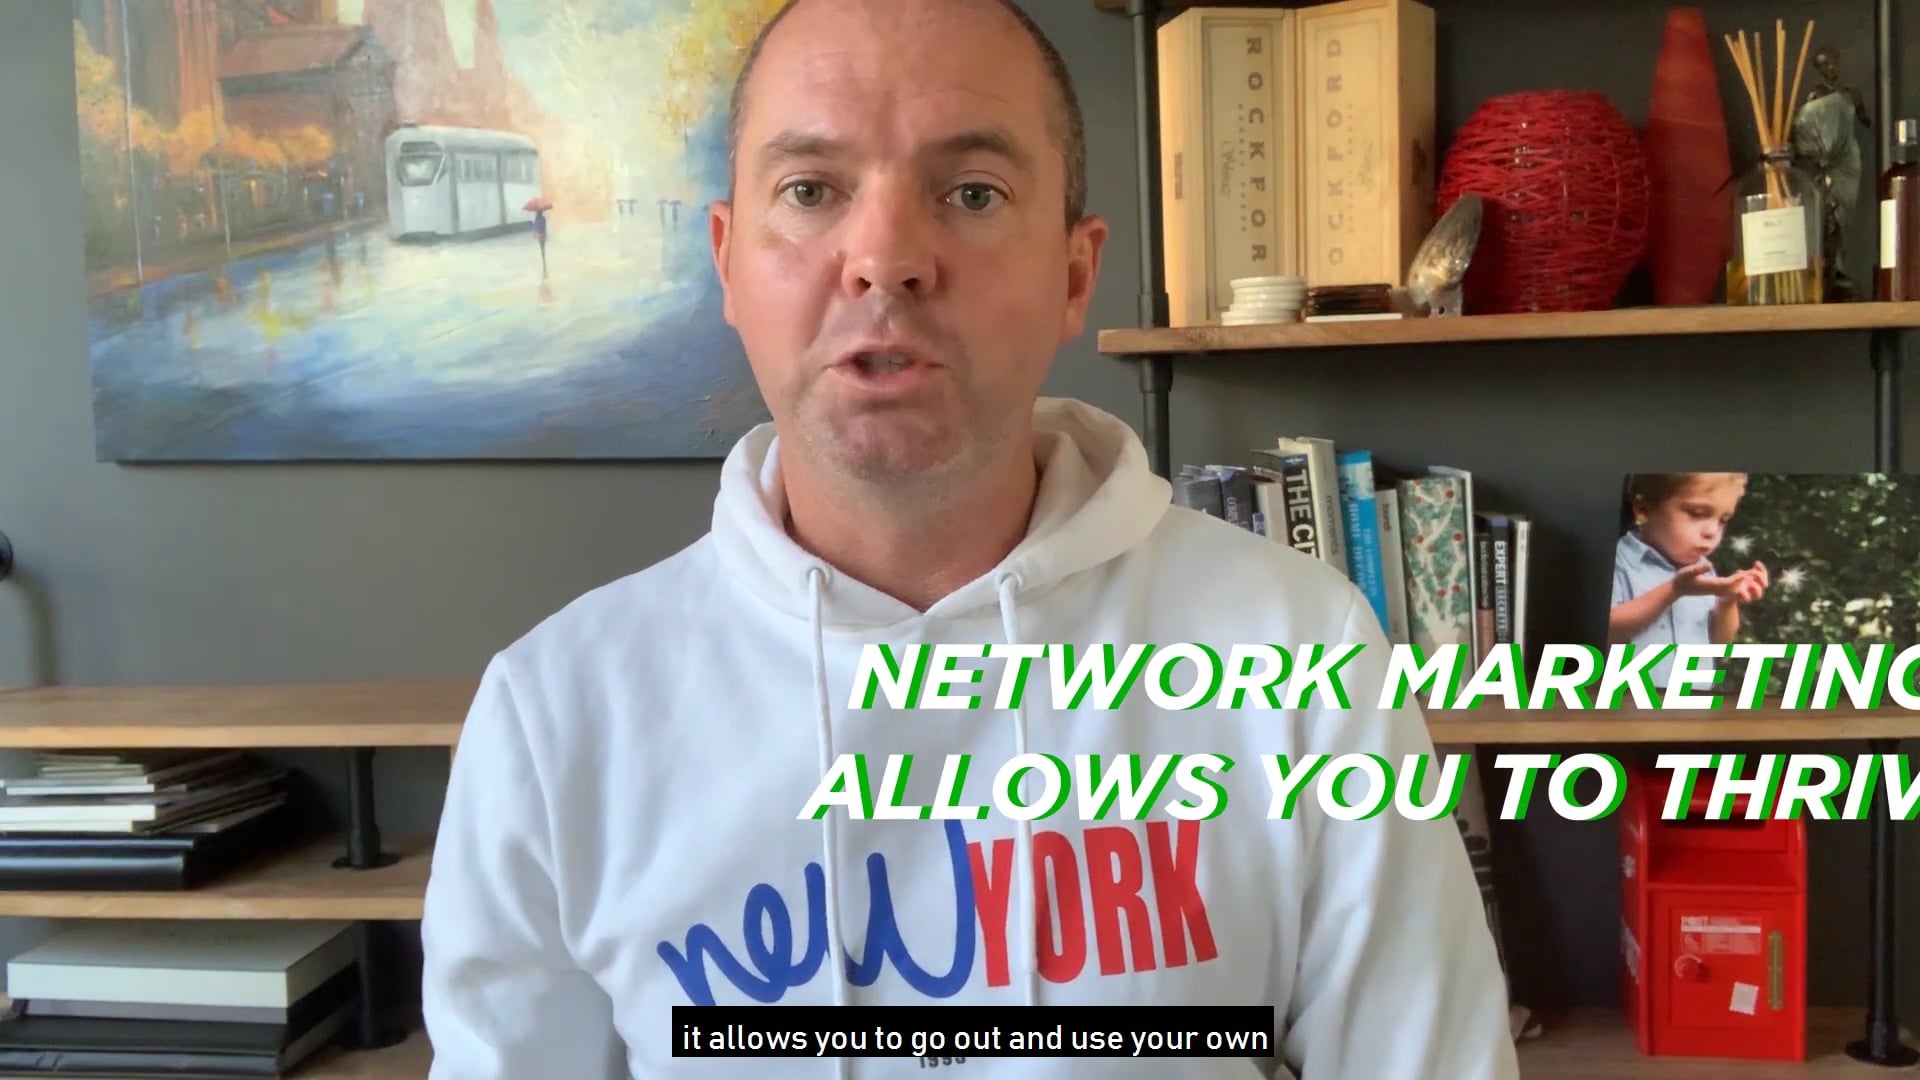 Episode 11 Of Becoming The Best Networker In The Industry on Vimeo